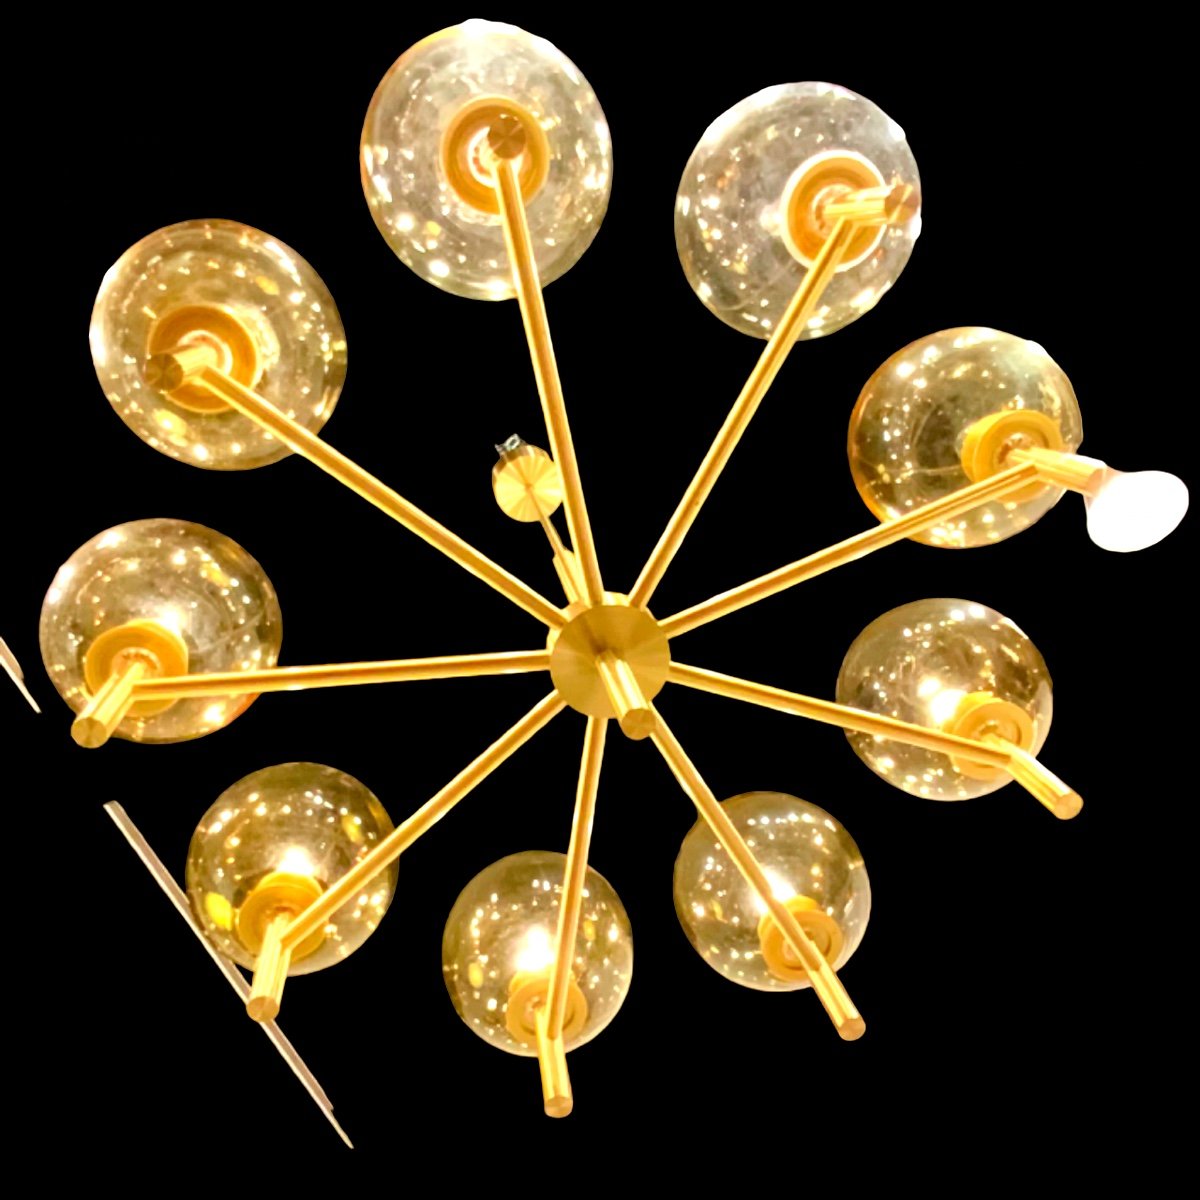 Large Luxus Chandelier With 9 Lights In Golden Brass And Amber Glass Globes, Sweden 1970s/80s-photo-4